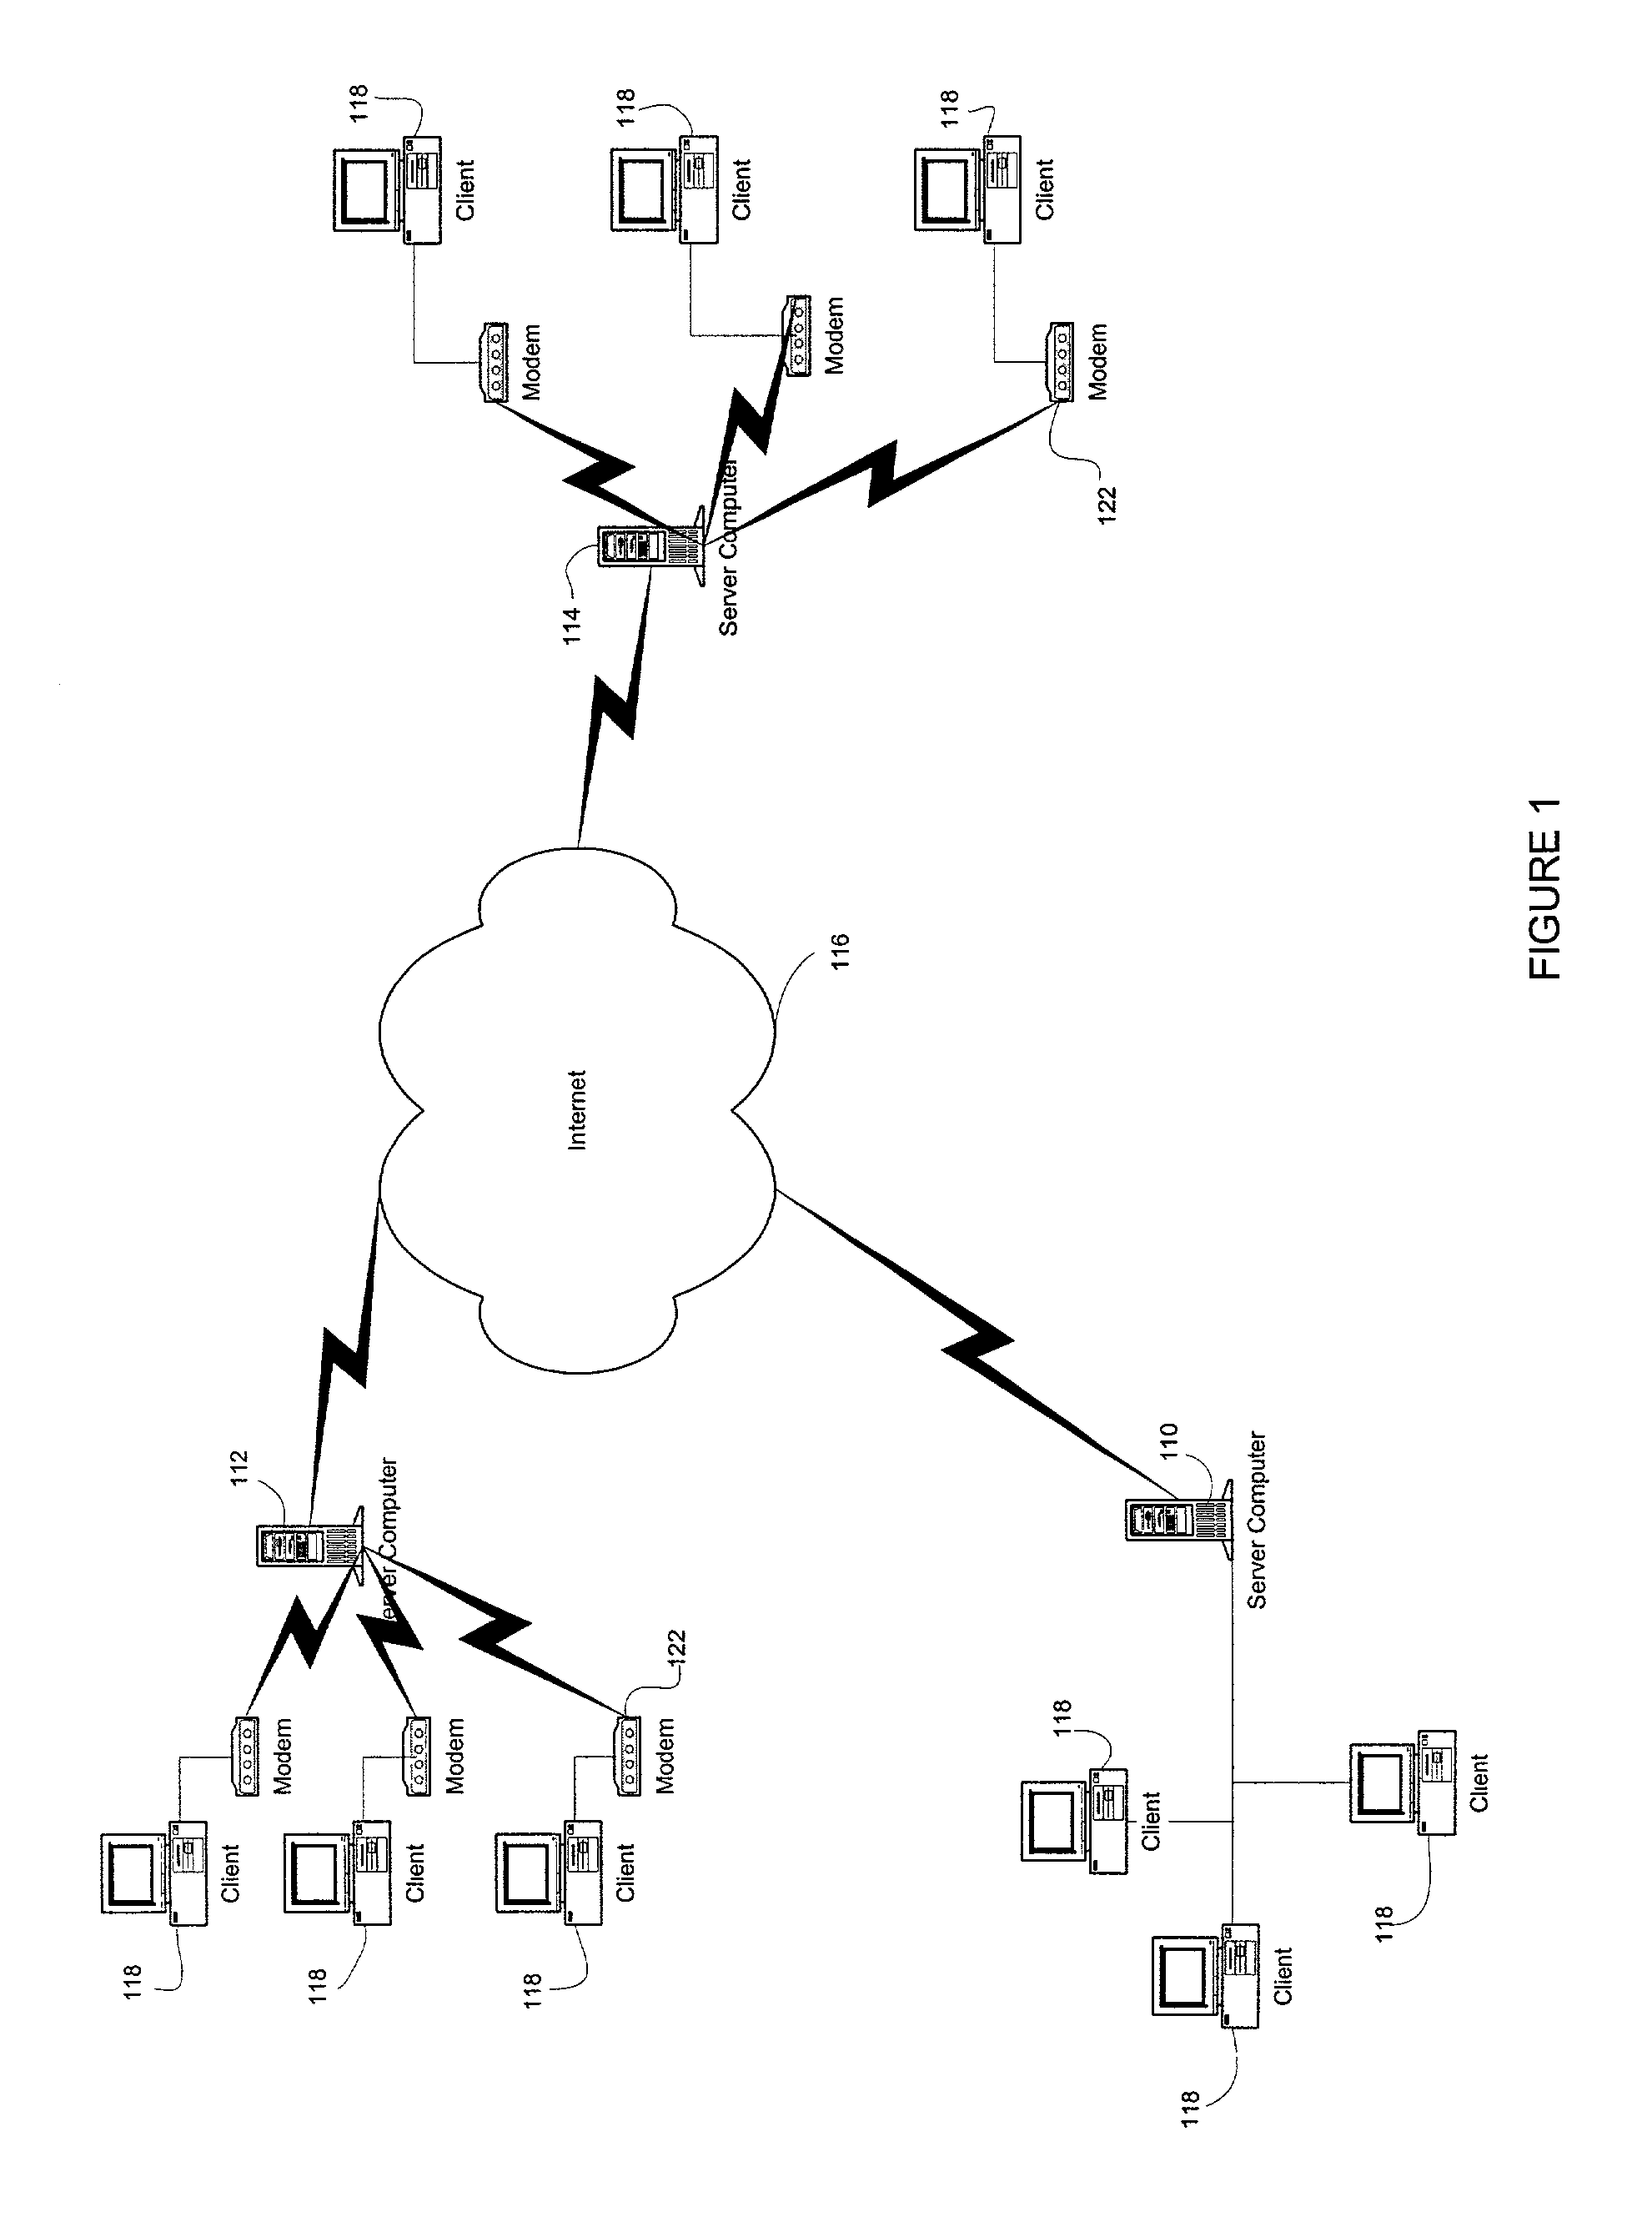 System and method for sorting e-mail using a vendor registration code and a vendor registration purpose code previously assigned by a recipient